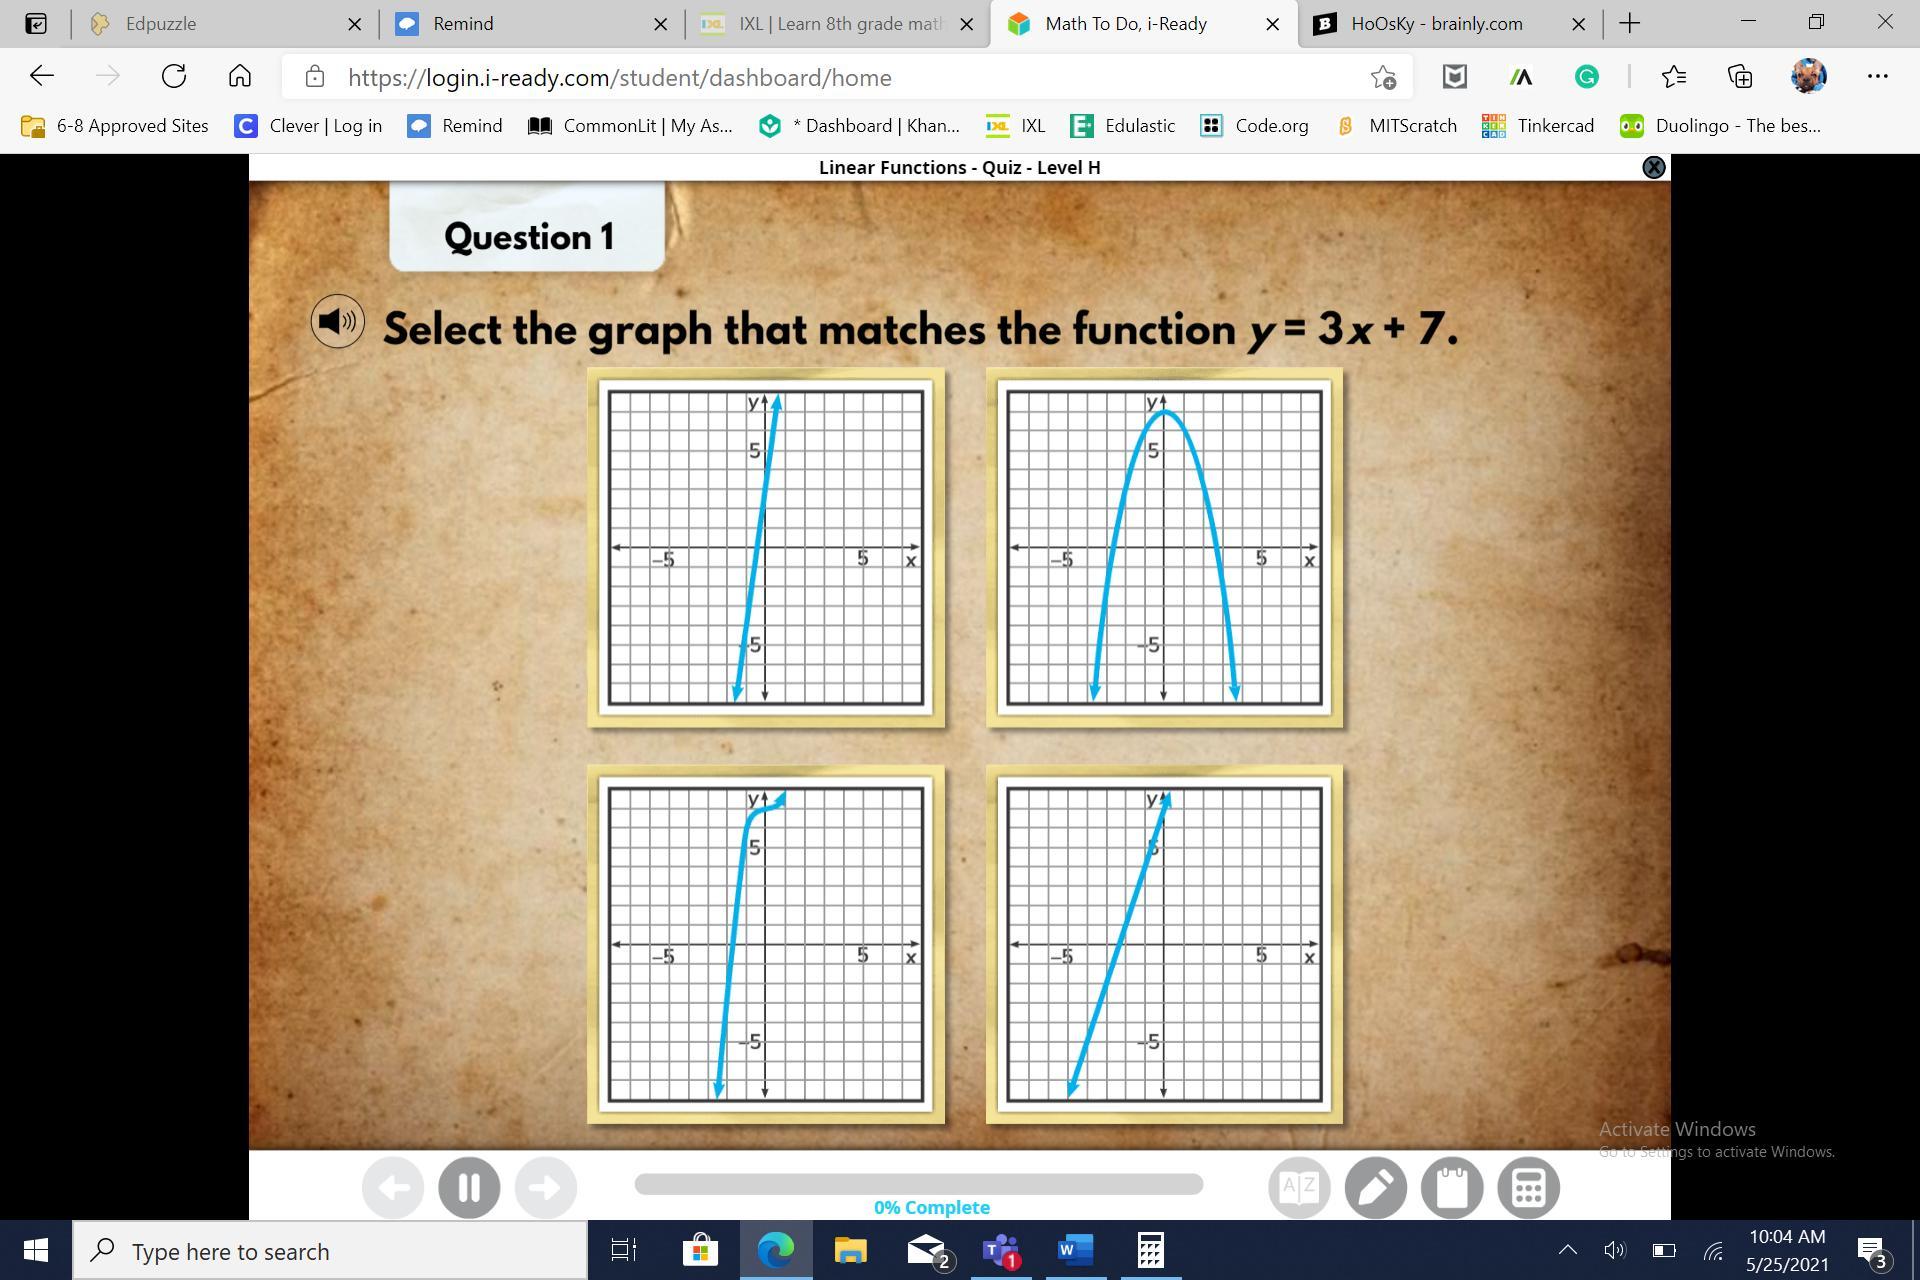 Select The Graph That Matches The Function Y=3x+7